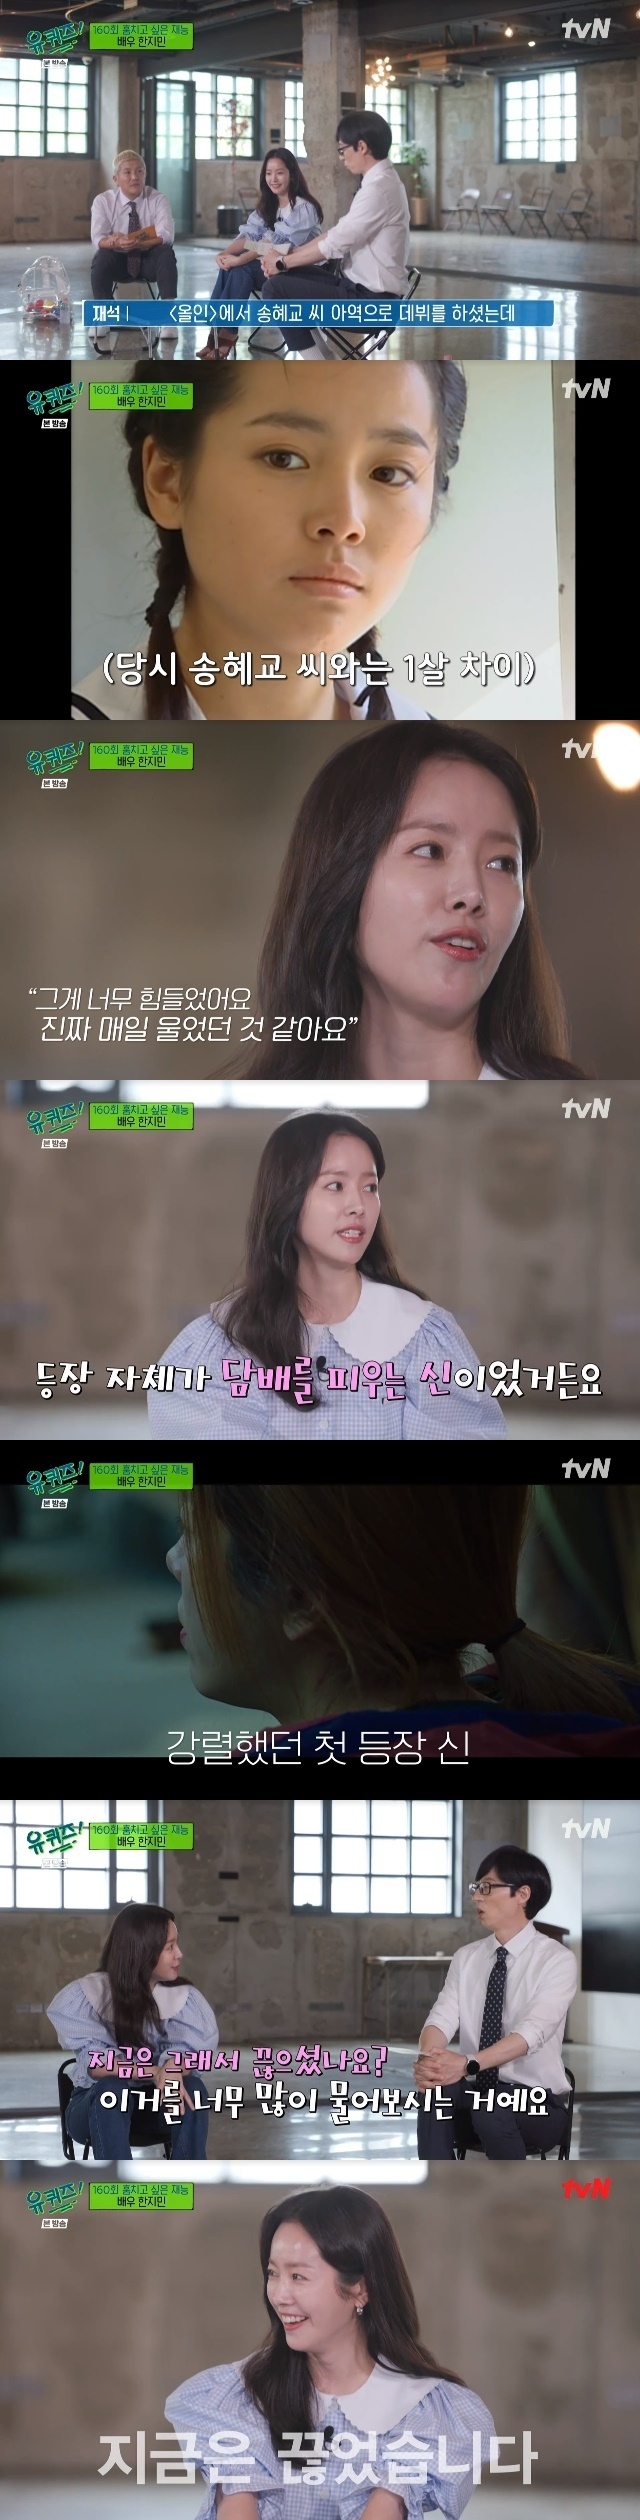 Han Ji-min unveiled St.Vic-Fezensac, who became a passionate actor to learn tobacco for his work in the child of Moy Yat crying Song Hye-kyo.In the 160th episode of tvN You Quiz on the Block (hereinafter referred to as You Quiz on the Block), which was broadcast on July 6, actor Han Ji-min appeared as a guest for the special feature of The Talent to Stolen.Han Ji-min debuted at the age of 22 as the song hye-kyo child of the drama All In.Han Ji-min said, I have never learned acting, but I made my debut fortunately. I could not go on because I was too bad at the scene.I can not sleep and shoot, but I was delayed because of me, so it seemed like I was ruining everything. It was so hard. Han Ji-min said, I lost confidence because I was burdened with seeing myself right away, and I was scared to go to the scene at the time.Han Ji-min has gained confidence in acting as well as popularity of the public through Dae Jang Geum and Discrete.One of the most indispensable works of Han Ji-min was the film Miss Back, which warmly solved child abuse.Han Ji-min said, It was difficult to find an investment or distributor because it was difficult to find an actress one-top. Han Ji-min said, It is a female one-top movie, so I do that role rather than difficulty, and investors say that I will lose it.I thought there would be a difference because many people knew the image that they expected and thought of me, but I think the investors were also worried.So I had a desire to do better. Han Ji-min attracted attention by saying that he practiced tobacco for Miss Back and spit.Han Ji-min said, I was the god who smoked tobacco in itself. I had no place to practice.I think that if there are many smokers, I can not enter the movie if I have a sense of heterogeneity. I also bite when I wash dishes, and I have lived a lot. I asked too much about Did you hang up now? He said, I have hung up now.Thanks to Miss Back, Han Ji-min won Best Actress at the 2018 Blue Dragon Film Festival.Han Ji-min said of the tears shed during the award testimony: It opened and (the audience) was less than 10,000, less than 20,000, and thats what it takes less than a week for the movie.I was not thinking that I would have been better if I was not the main character. I felt that the movie would not see the light in this award rather than the feeling that I did well.The drama Our Blues, which ended in the topic last month, was also mentioned.Han Ji-min said, I have been in a relationship with Noh Hee-kyung since 2007, and Young-ok said, Since the actor (jung Eun-hye) who comes out as a twin sister is also a real Down Syndrome and I have to shoot while caring, (the writer) said, I want you to help me a lot.I also had prejudice, Confessions said. I have a Down Syndrome friend who is a distant friend.It is a little difficult to interact with people, and there is a sensitive part in eye contact or emotional control.When I came to the scene, I was worried about how I would adapt and I did not think it would be possible because of the high amount of metabolism. (But) Everyone helped me with a little love and I became as good as a professional.It was a chance to find it in a drama at a certain point, and it seemed that the episode was bought because Eun Hye was good. Finally, Han Ji-min hesitated for a while when asked if he was happy these days, and said, It seems like I am happy and thankful for being innocent.